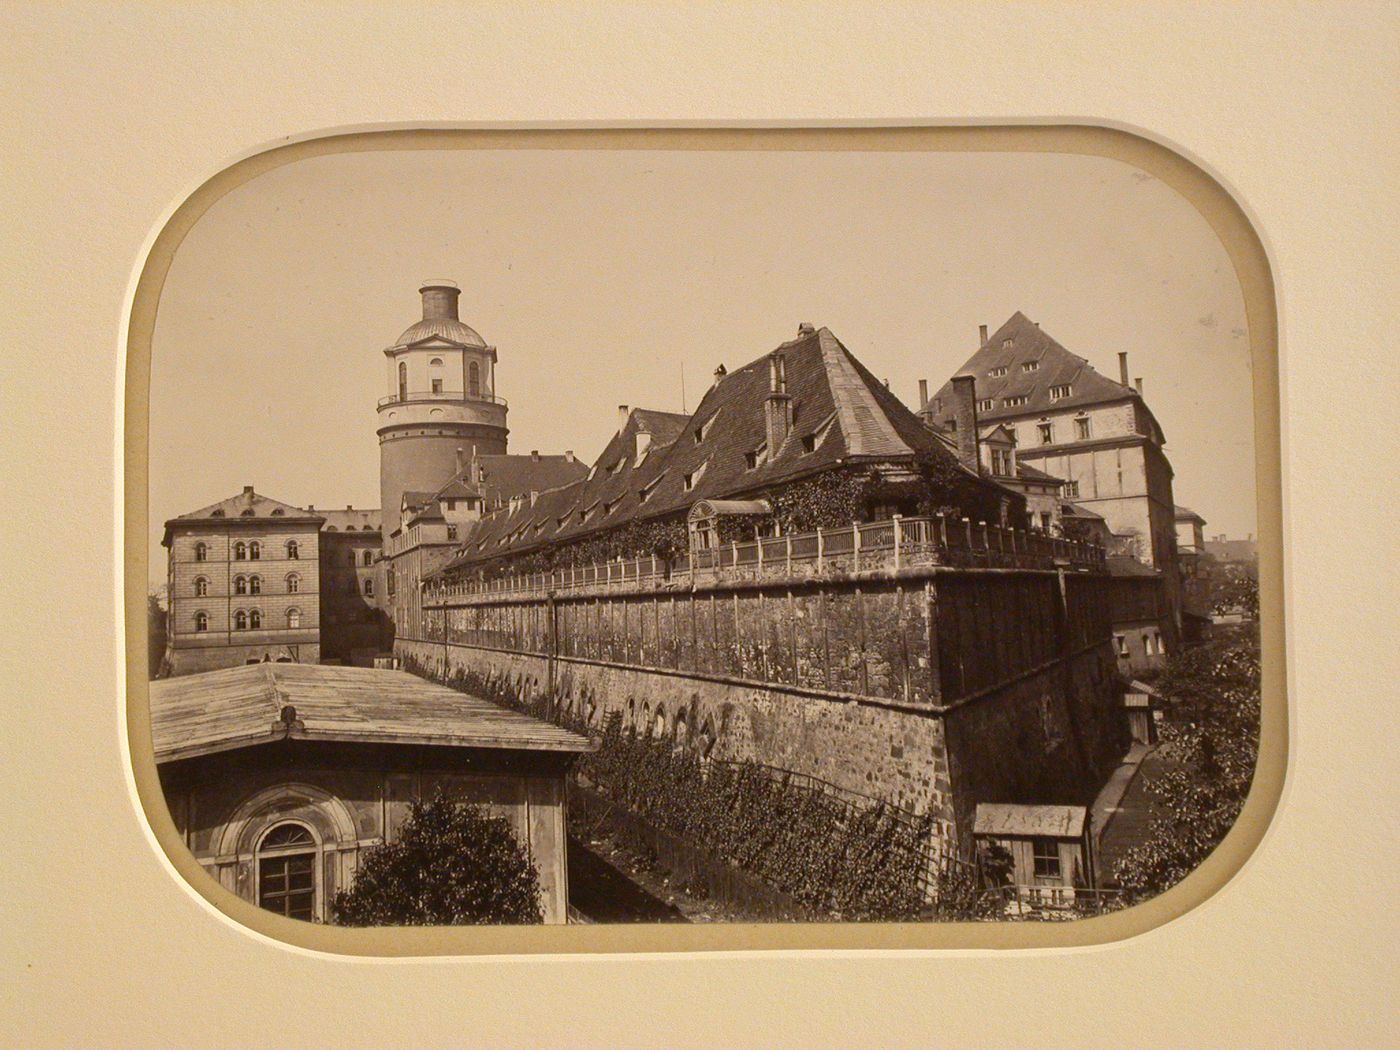 Strangely angled view of large fortified ? building with round tower in background, Leipzig, Germany